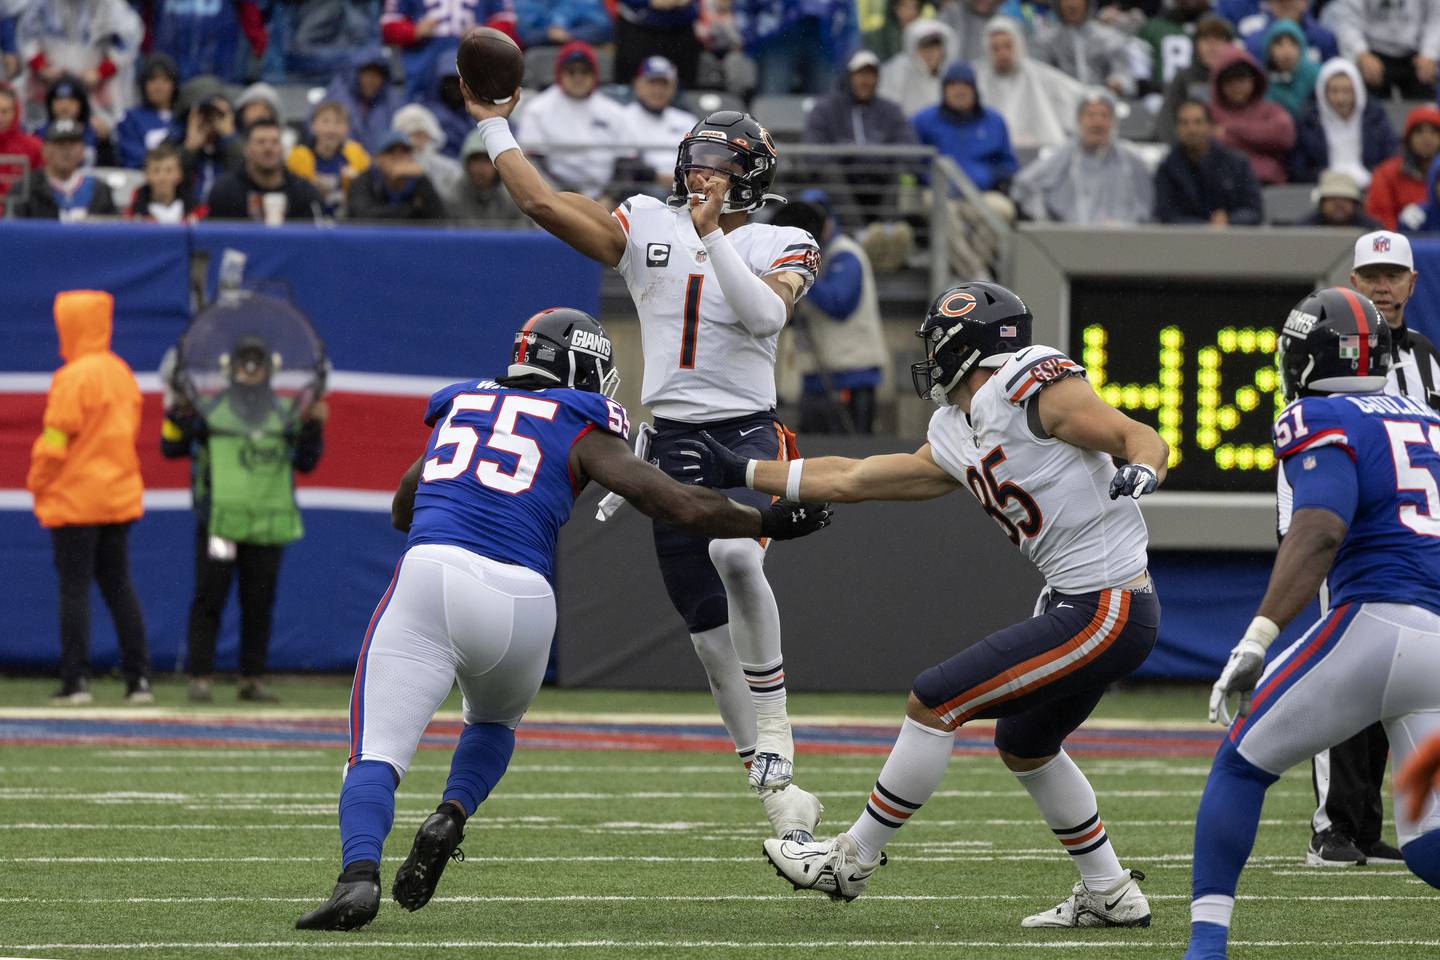 Bears quarterback Justin Fields (1) throws an incomplete pass during the third quarter against the Giants on Sunday at MetLife Stadium in East Rutherford, N.J. The Bears lost 20-12. 